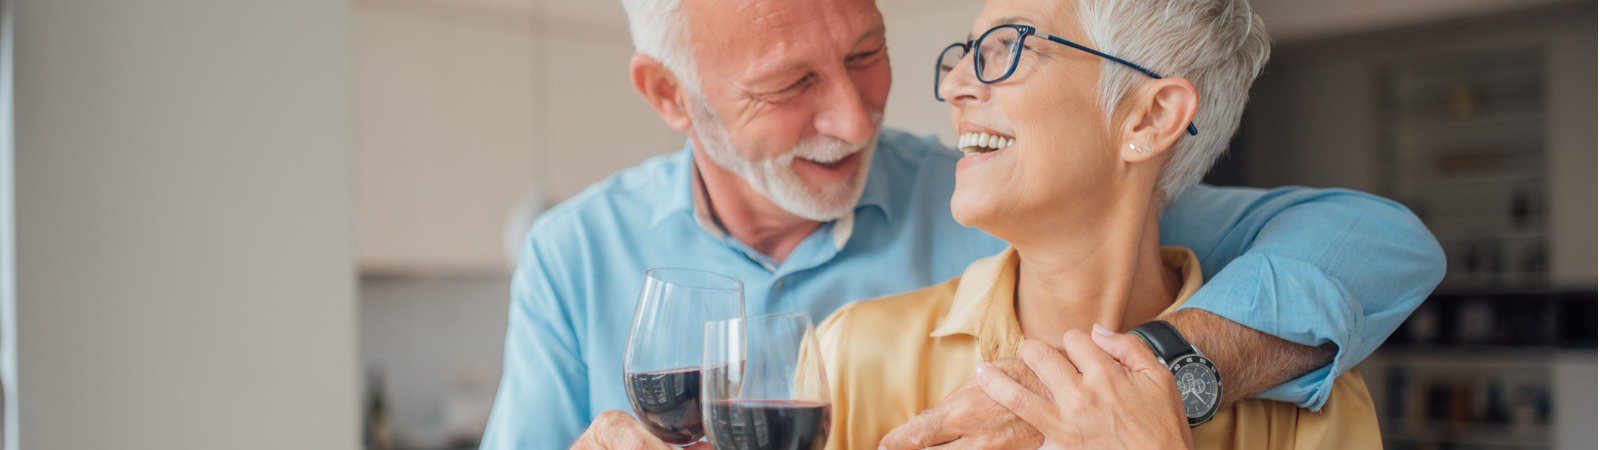 smiling-man-and-woman-holding-glasses-of-red-wine